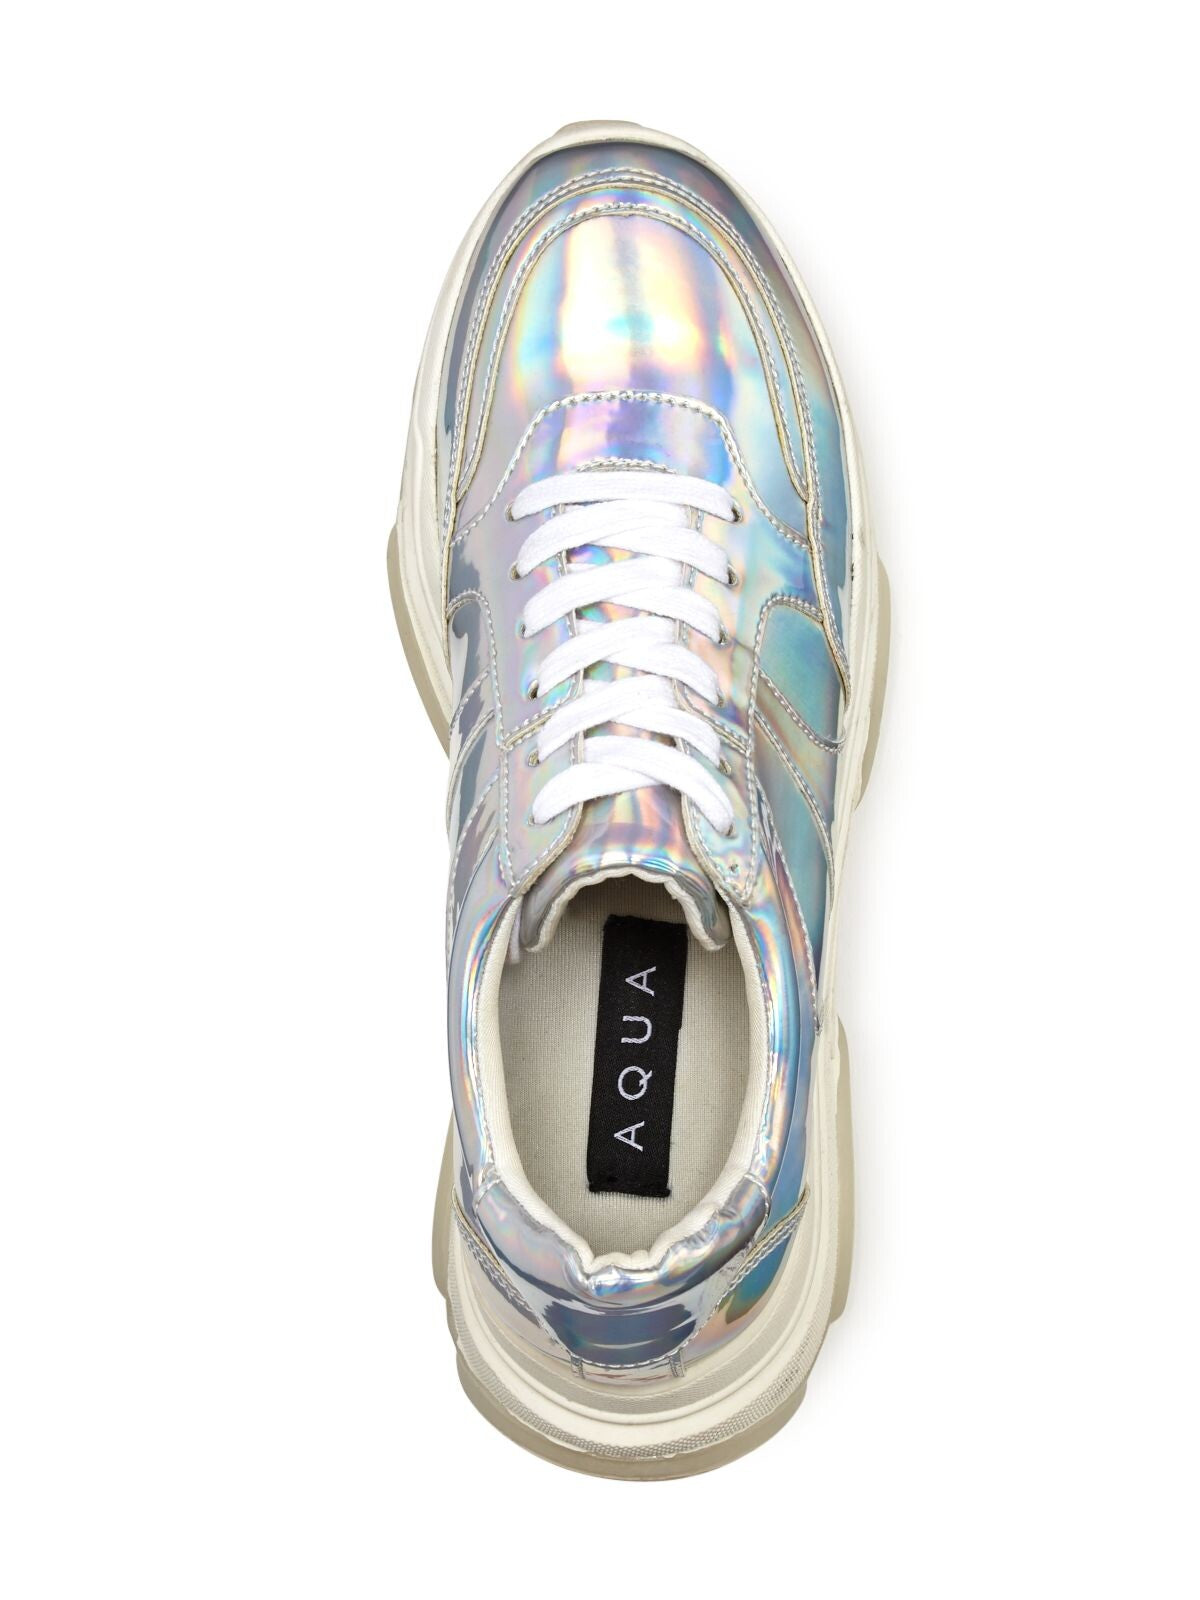 AQUA Womens Iridescent Silver Mixed Media 1" Platform Cushioned Ike Round Toe Lace-Up Athletic Sneakers Shoes 6 M